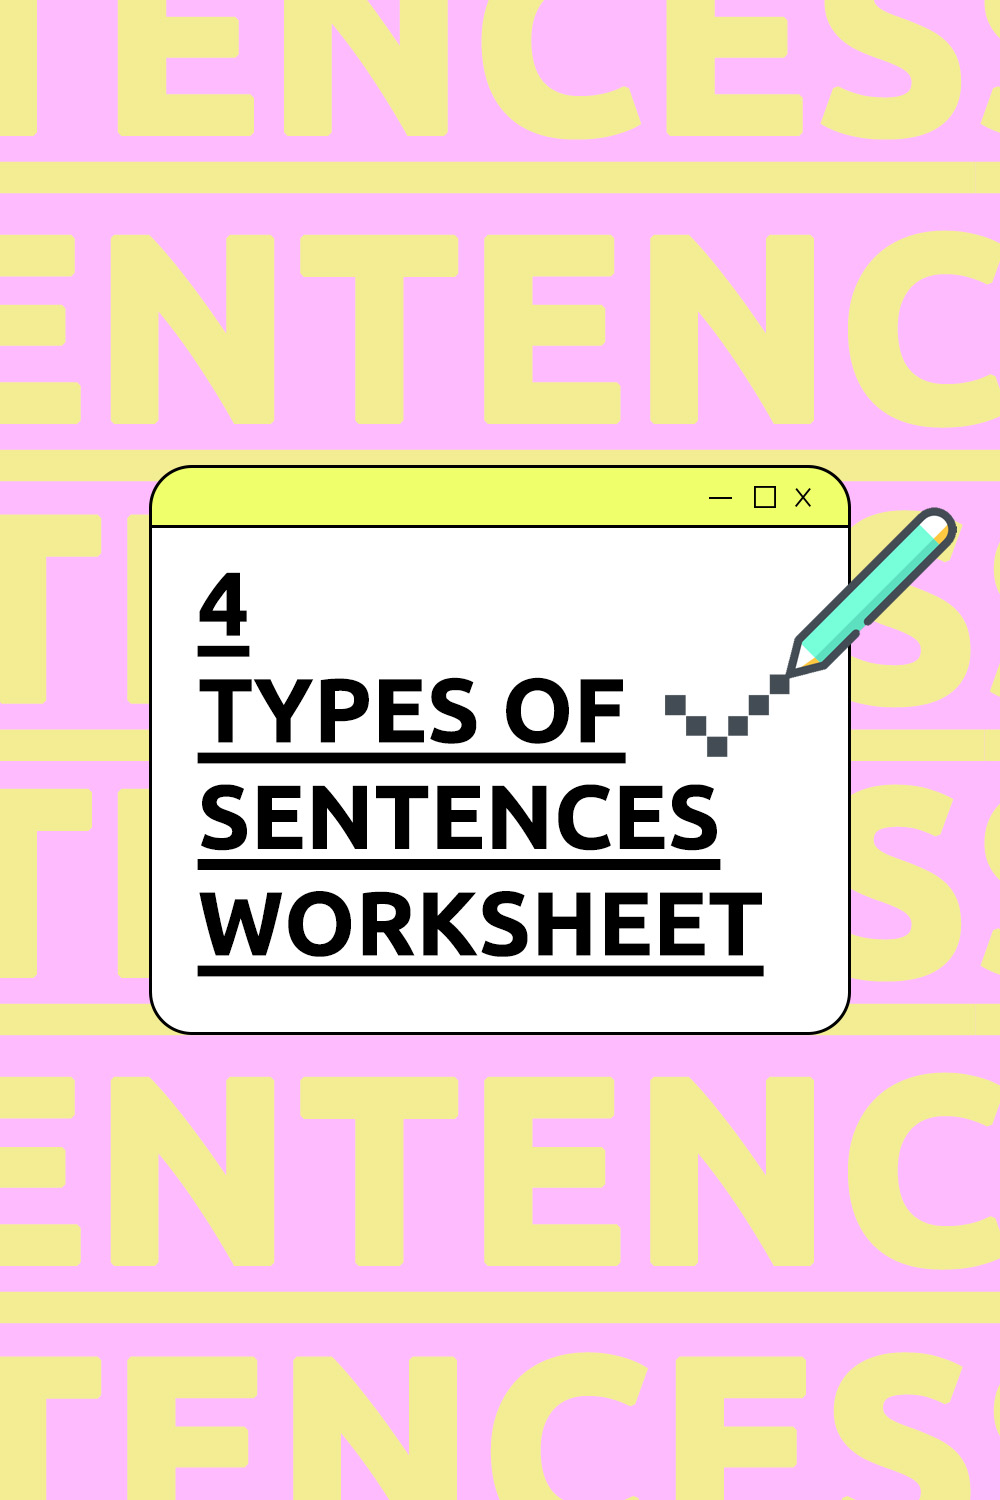 18 Images of 4 Types Of Sentences Worksheets